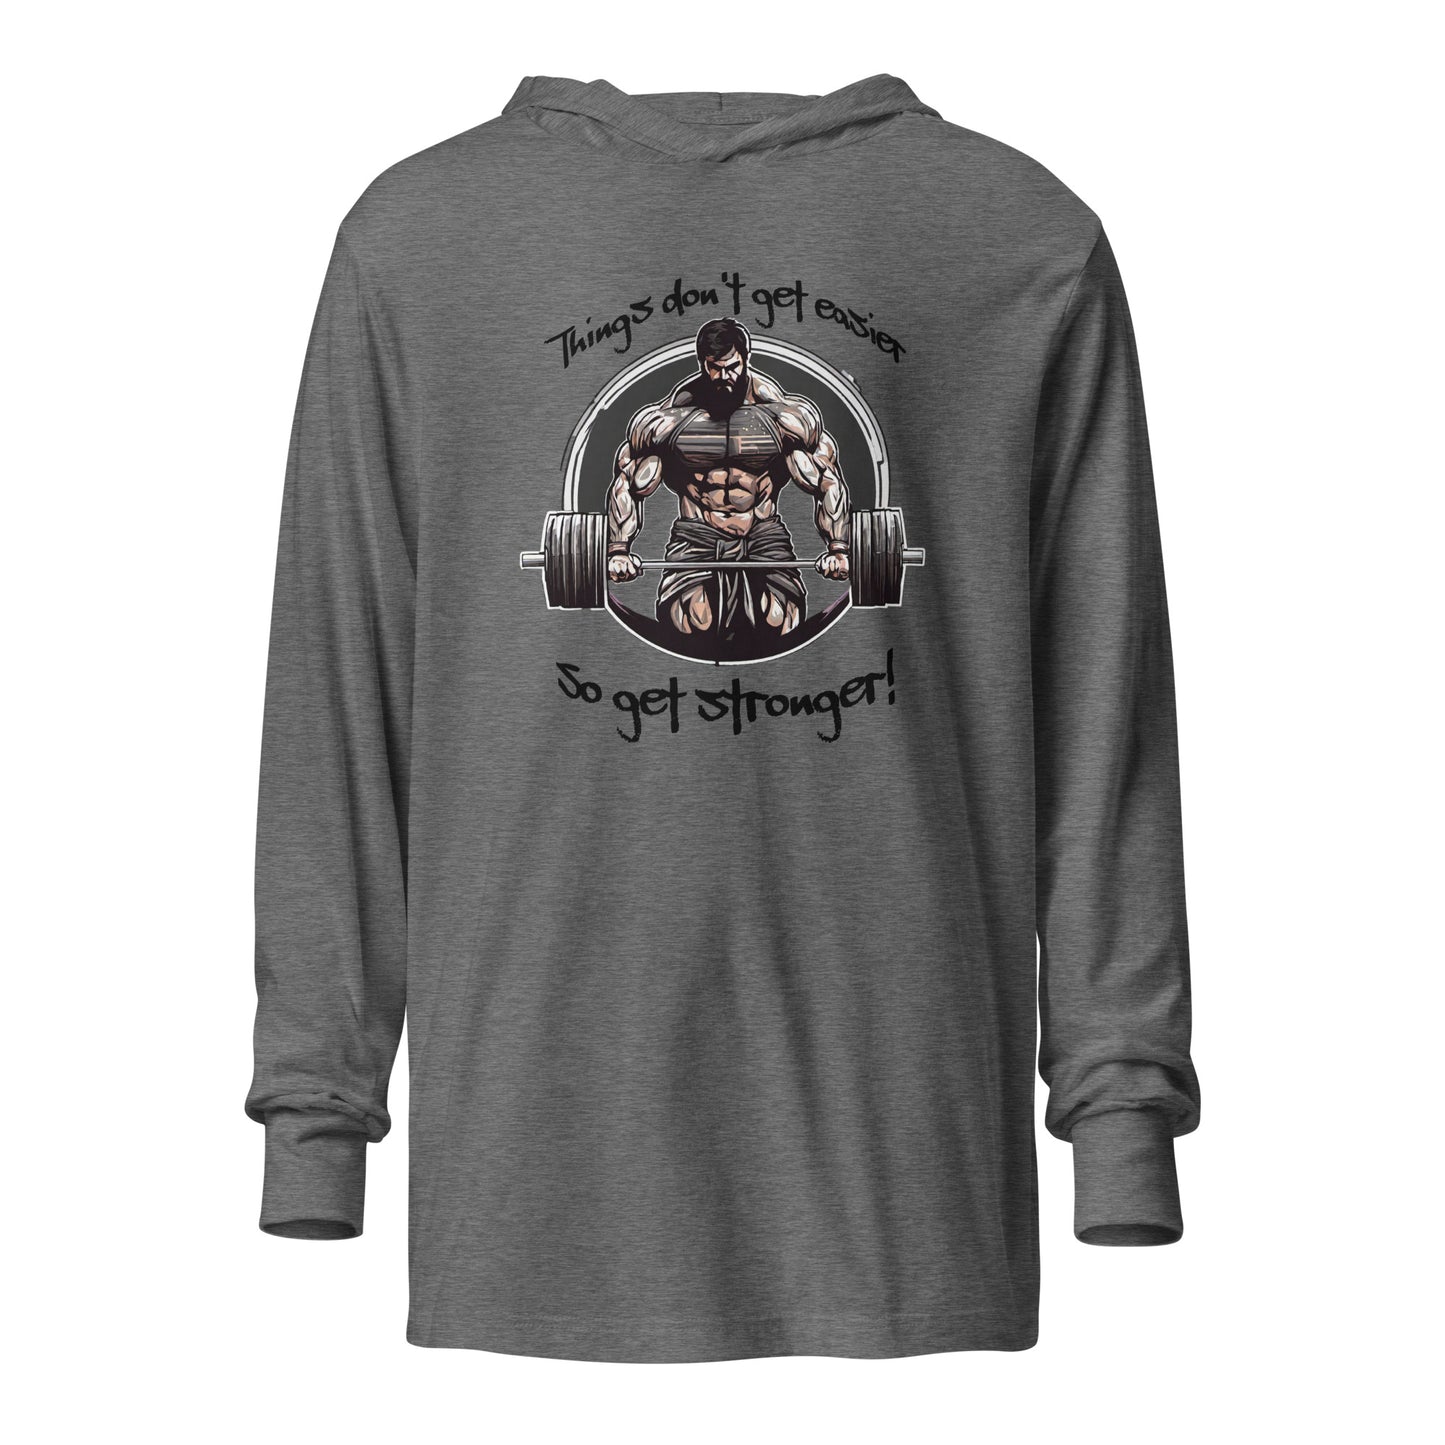 Life's Hard, Get Strong Men's Hooded Long-Sleeve Tee Grey Triblend